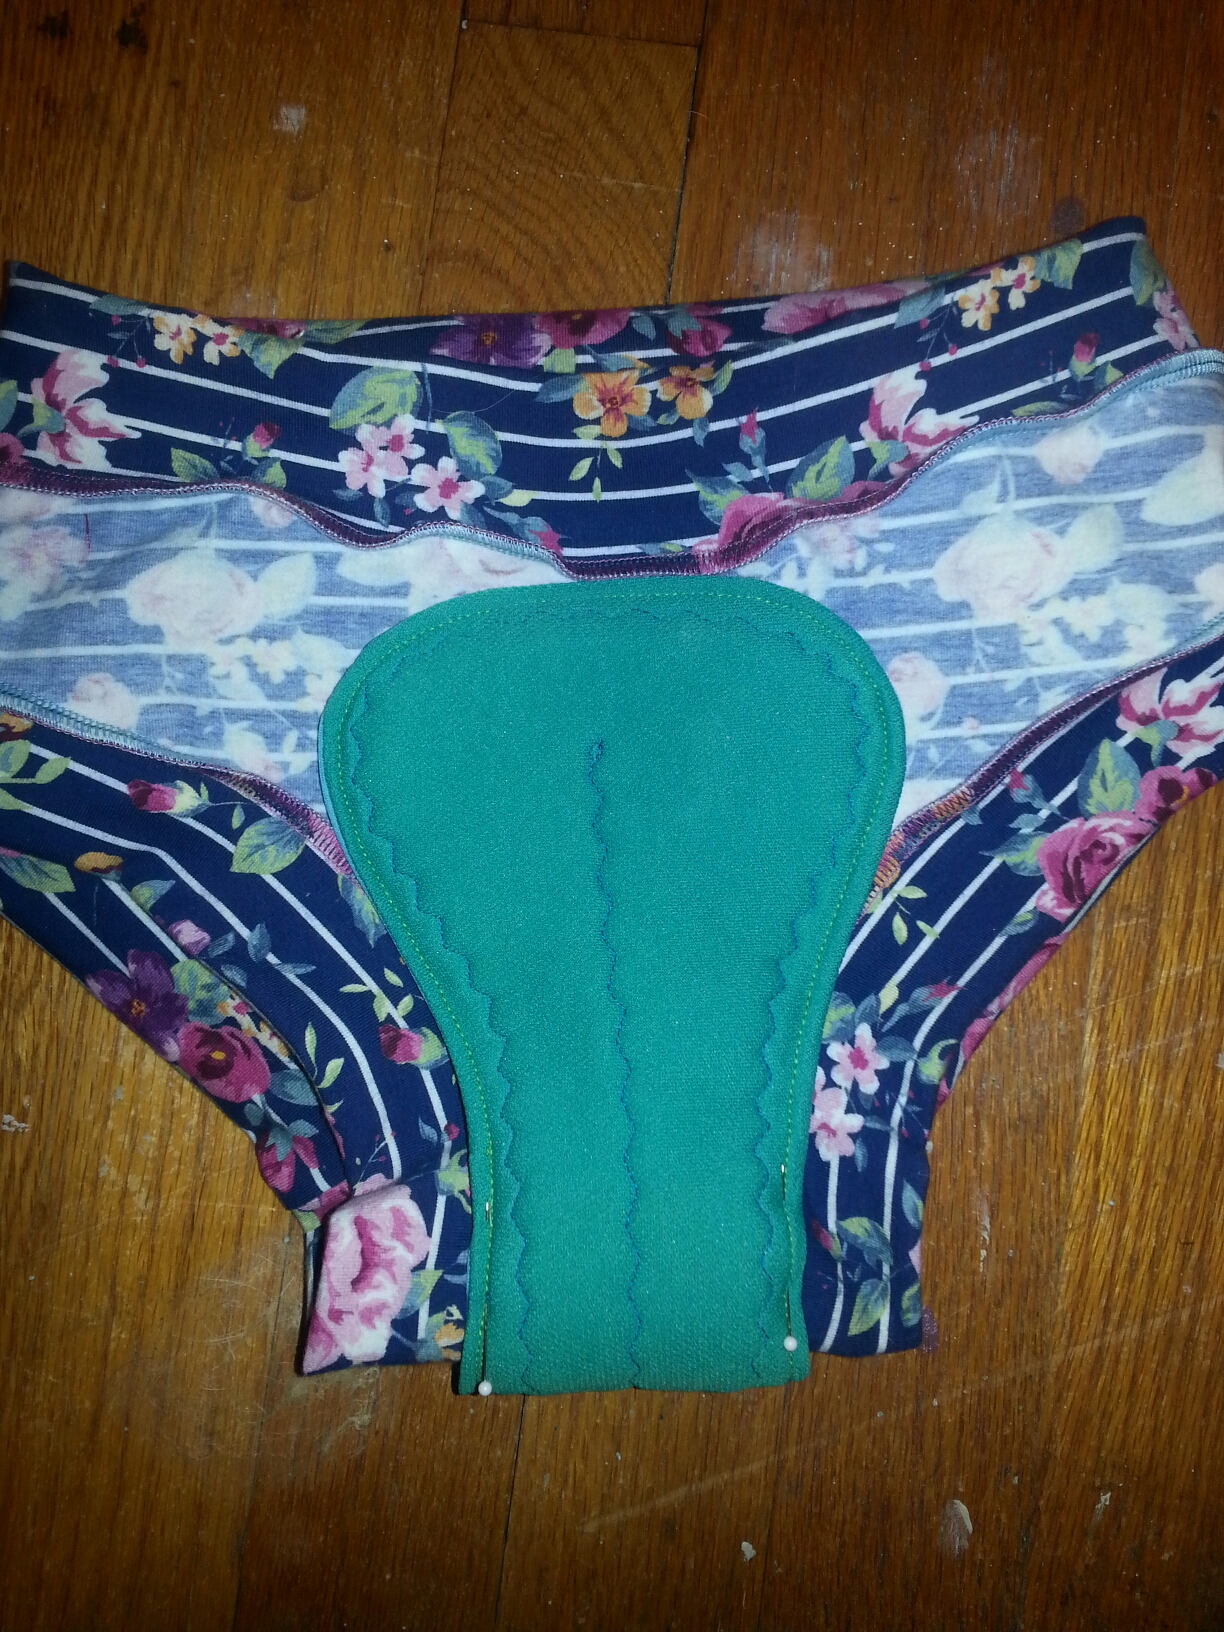 Making Cute Period Panties! – thriftyinnovations